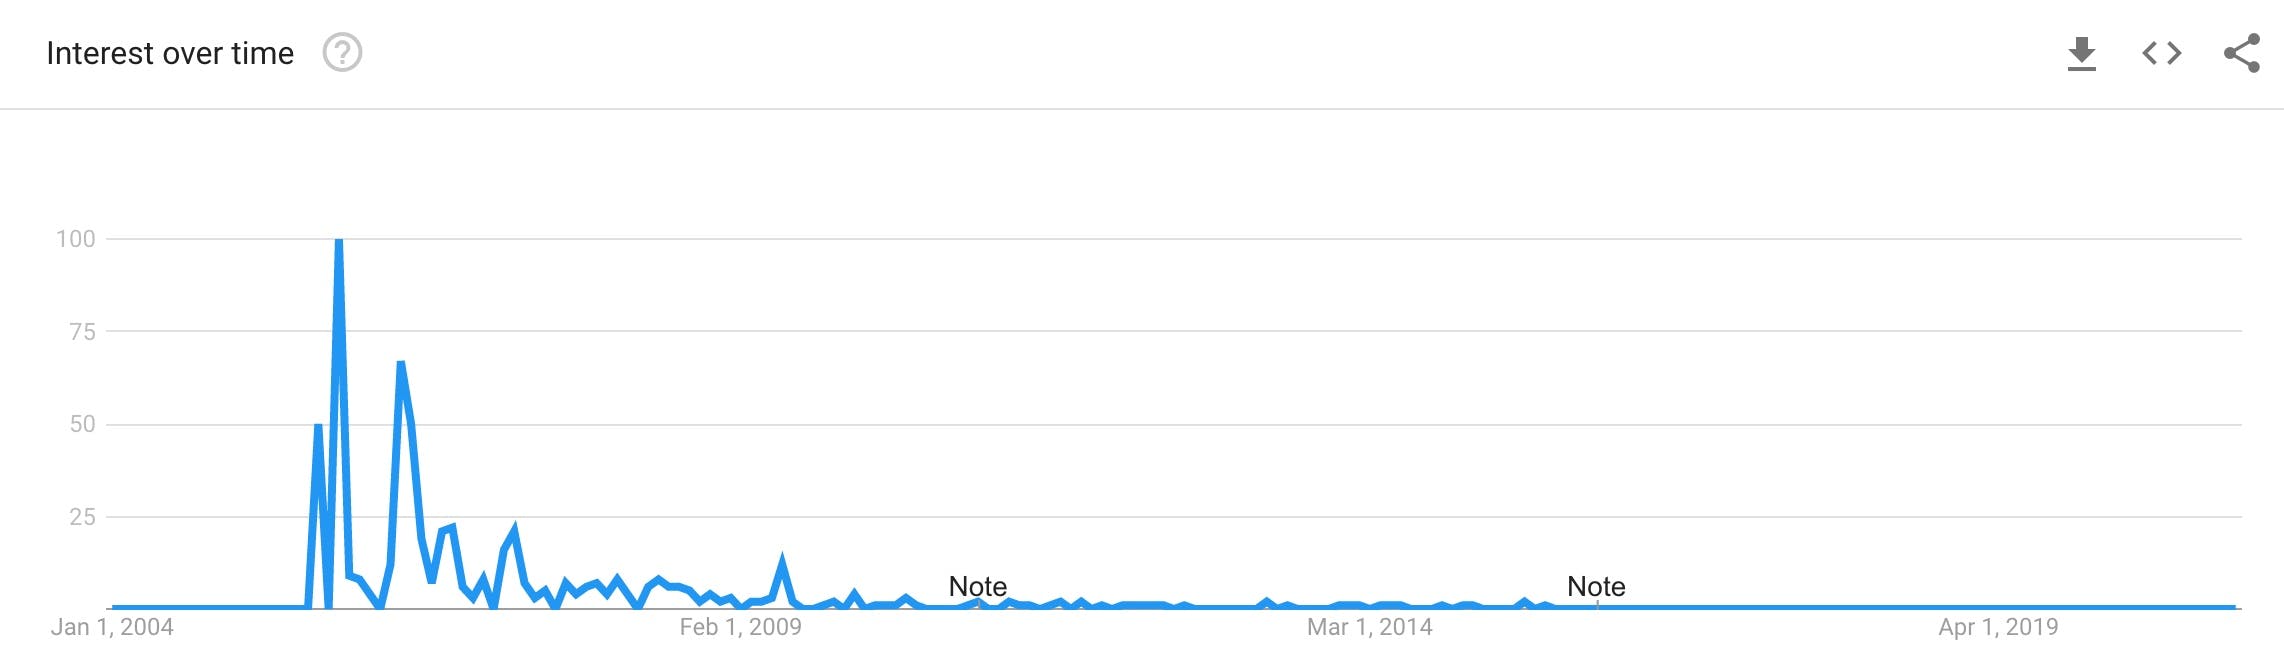 Google Searches for Seth Roberts' Theory over time